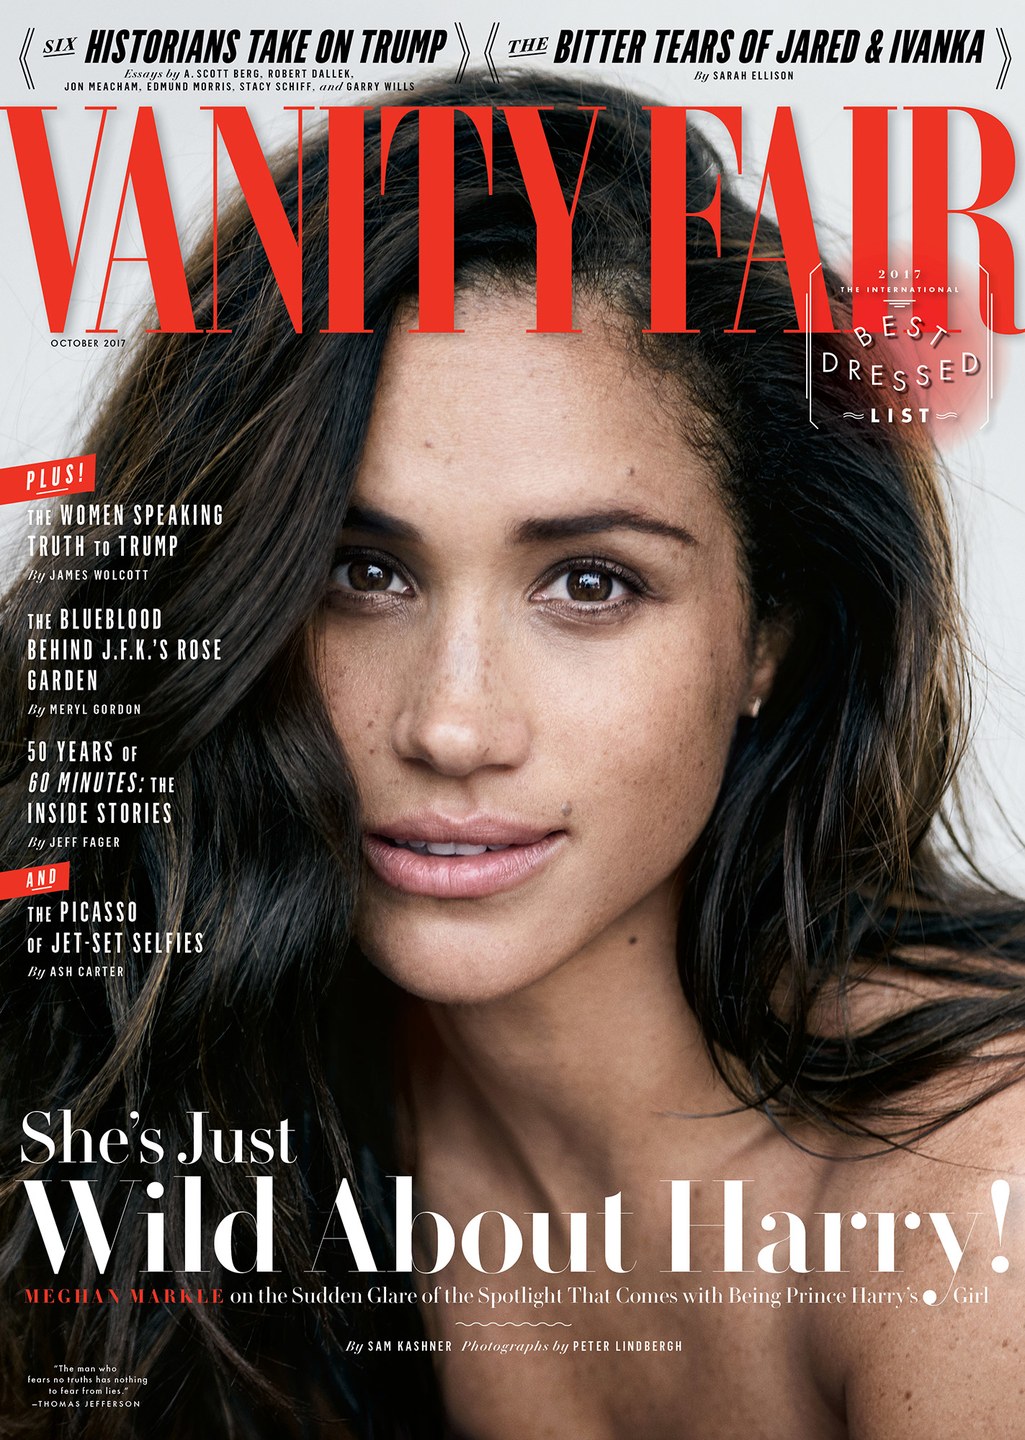 Meghan Markle ‘was furious about her Vanity Fair cover claiming it was RACIST due to quote used’, insider claims